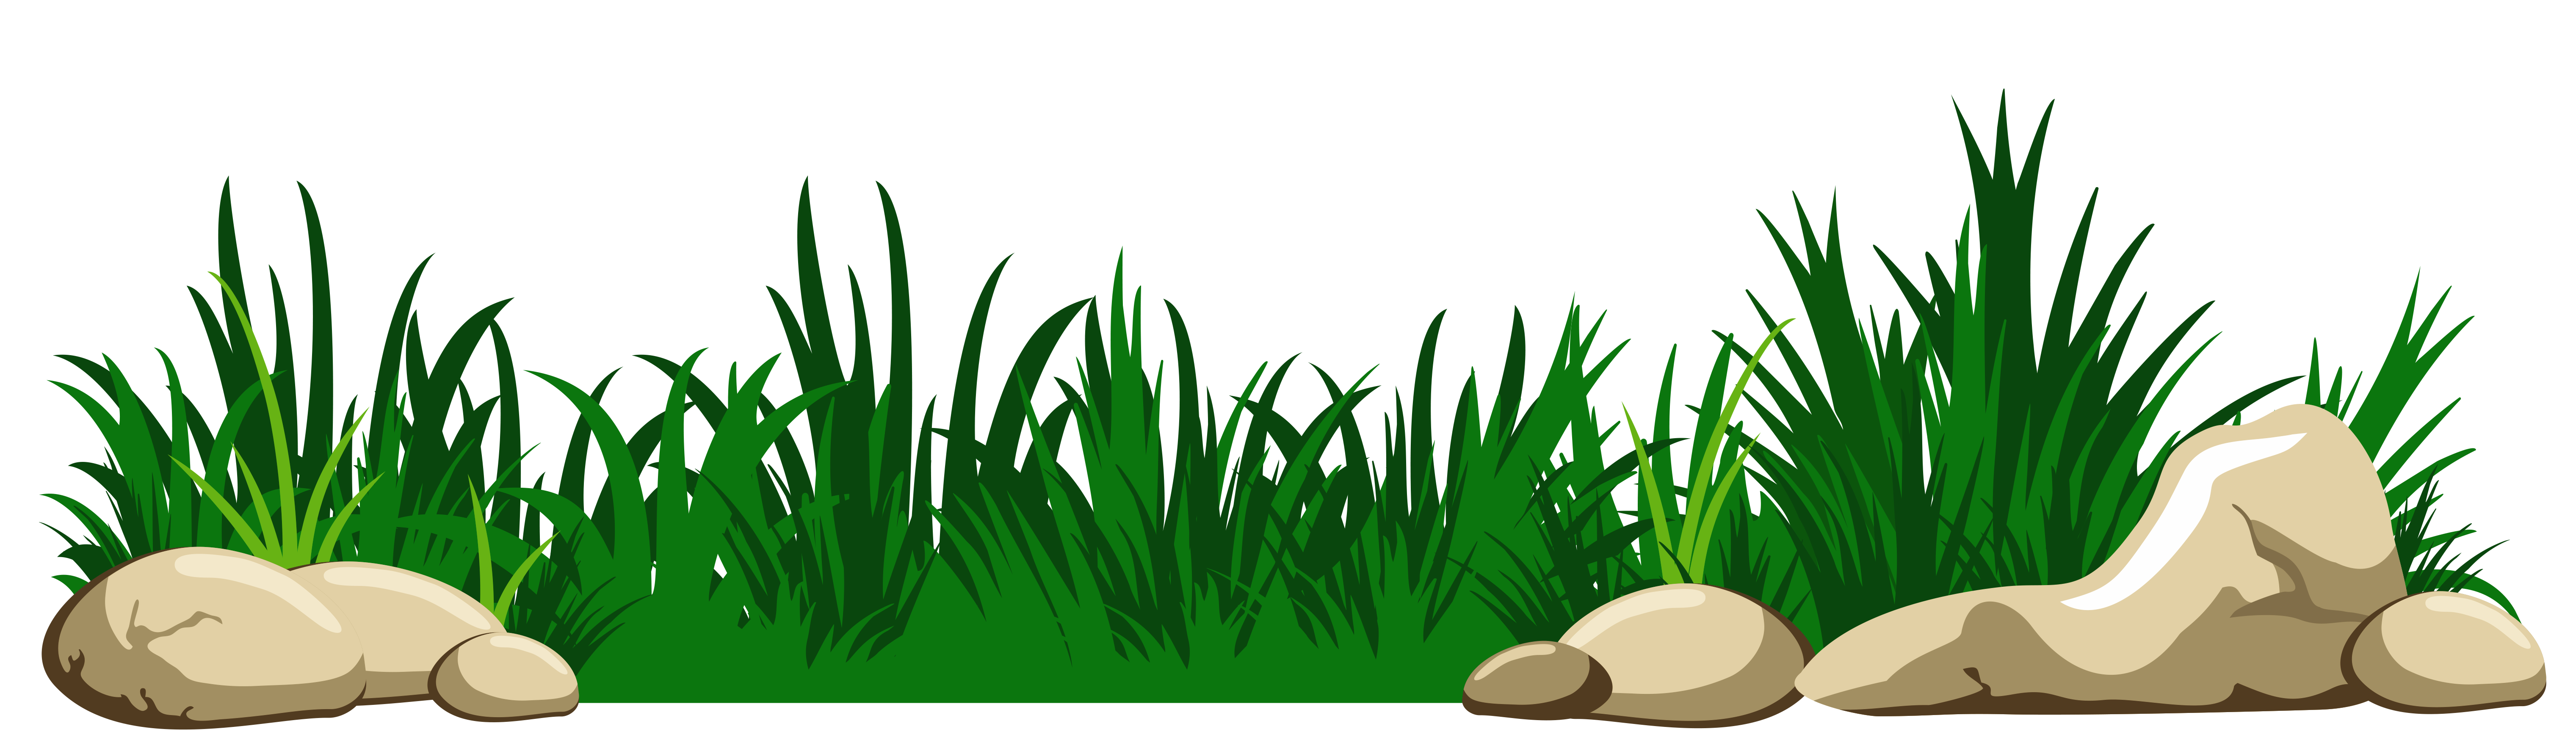 Grass With Transparent Rocks Free Clipart HD Clipart